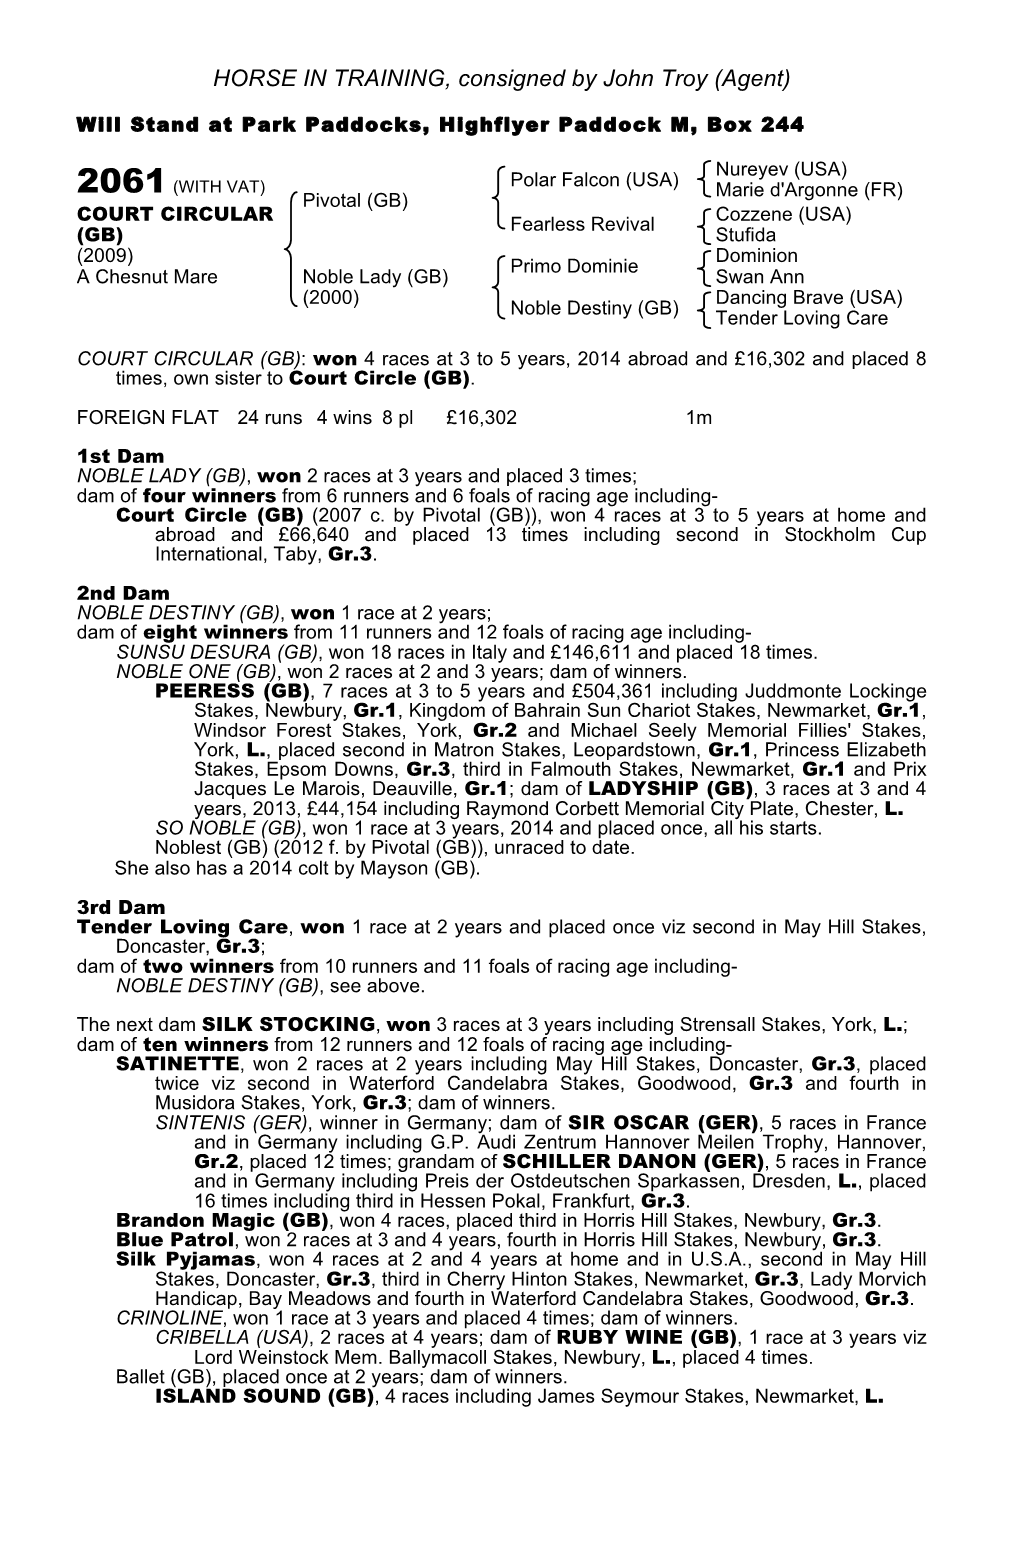 HORSE in TRAINING, Consigned by John Troy (Agent)